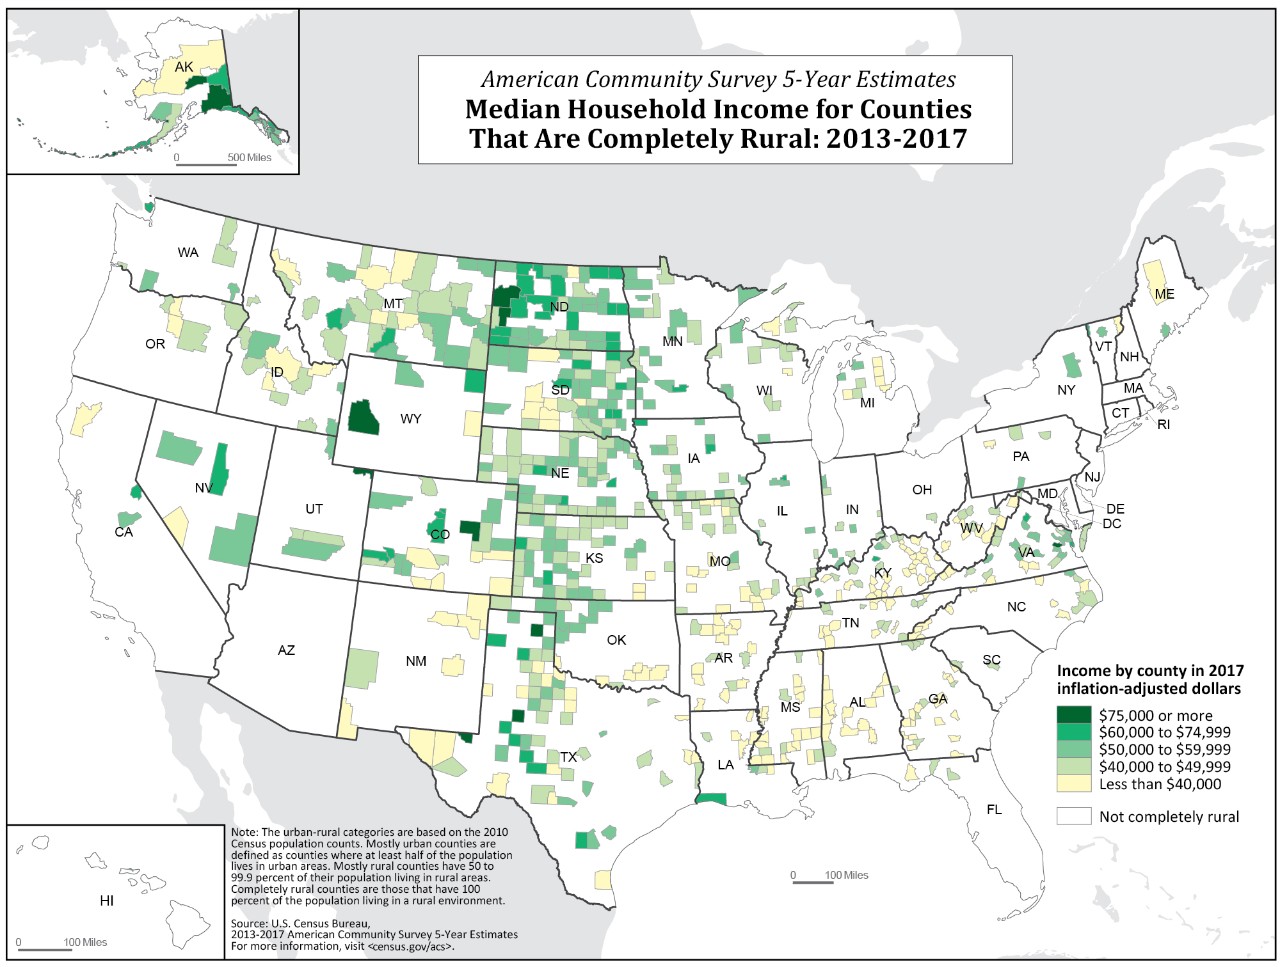 Median Household Income for Counties That Are Completely Rural: 2013-2017